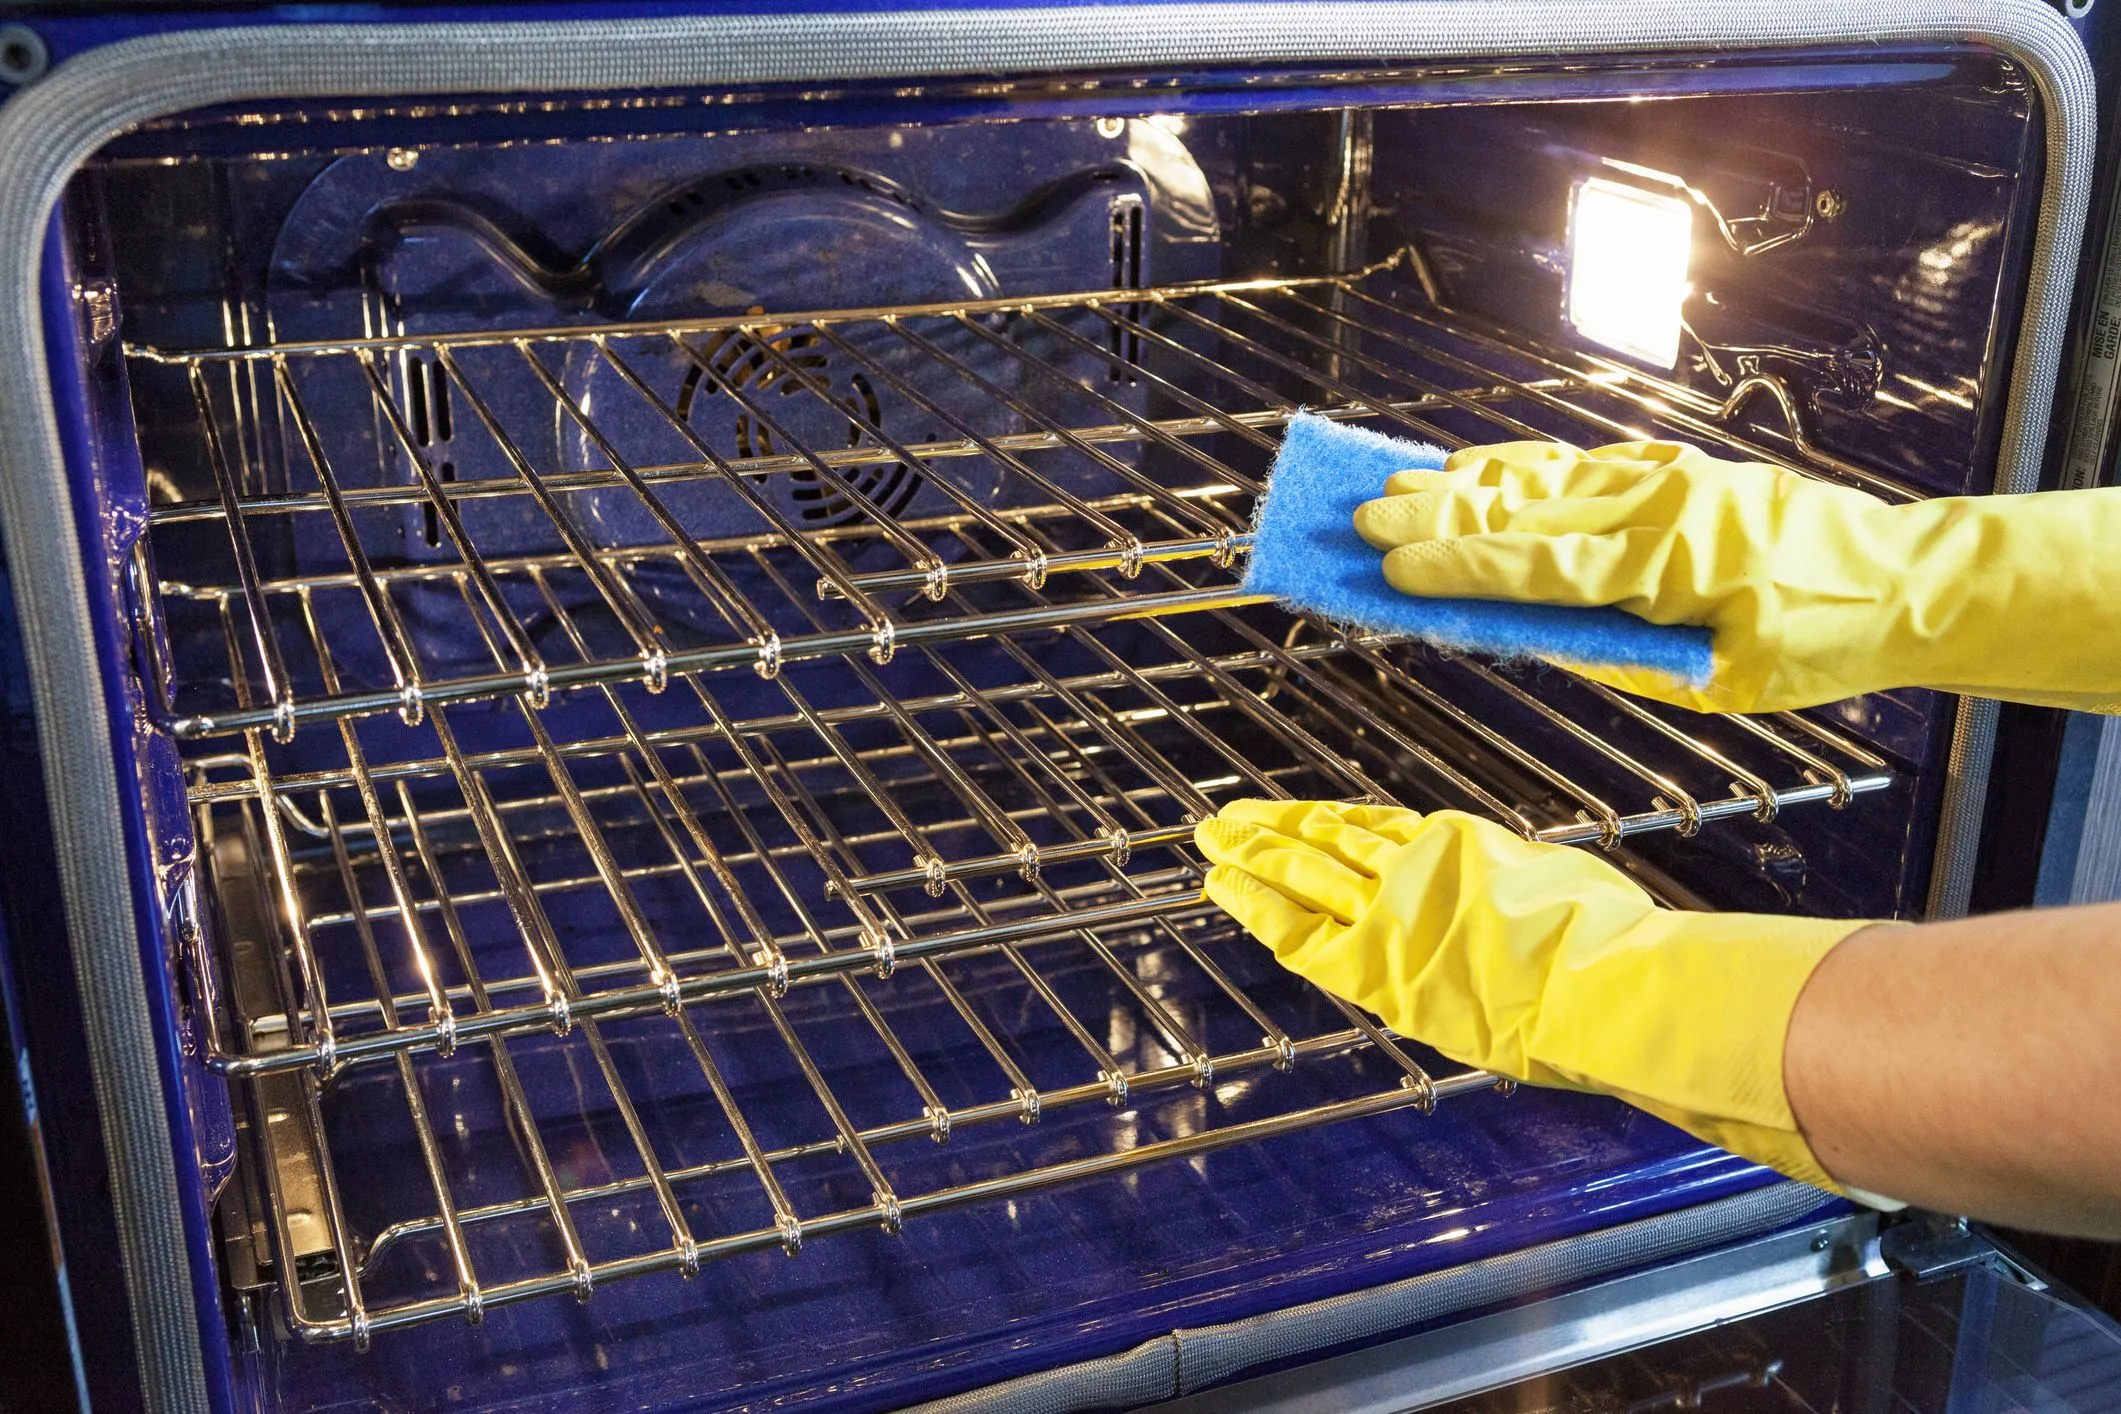 How to Clean Whirlpool Oven